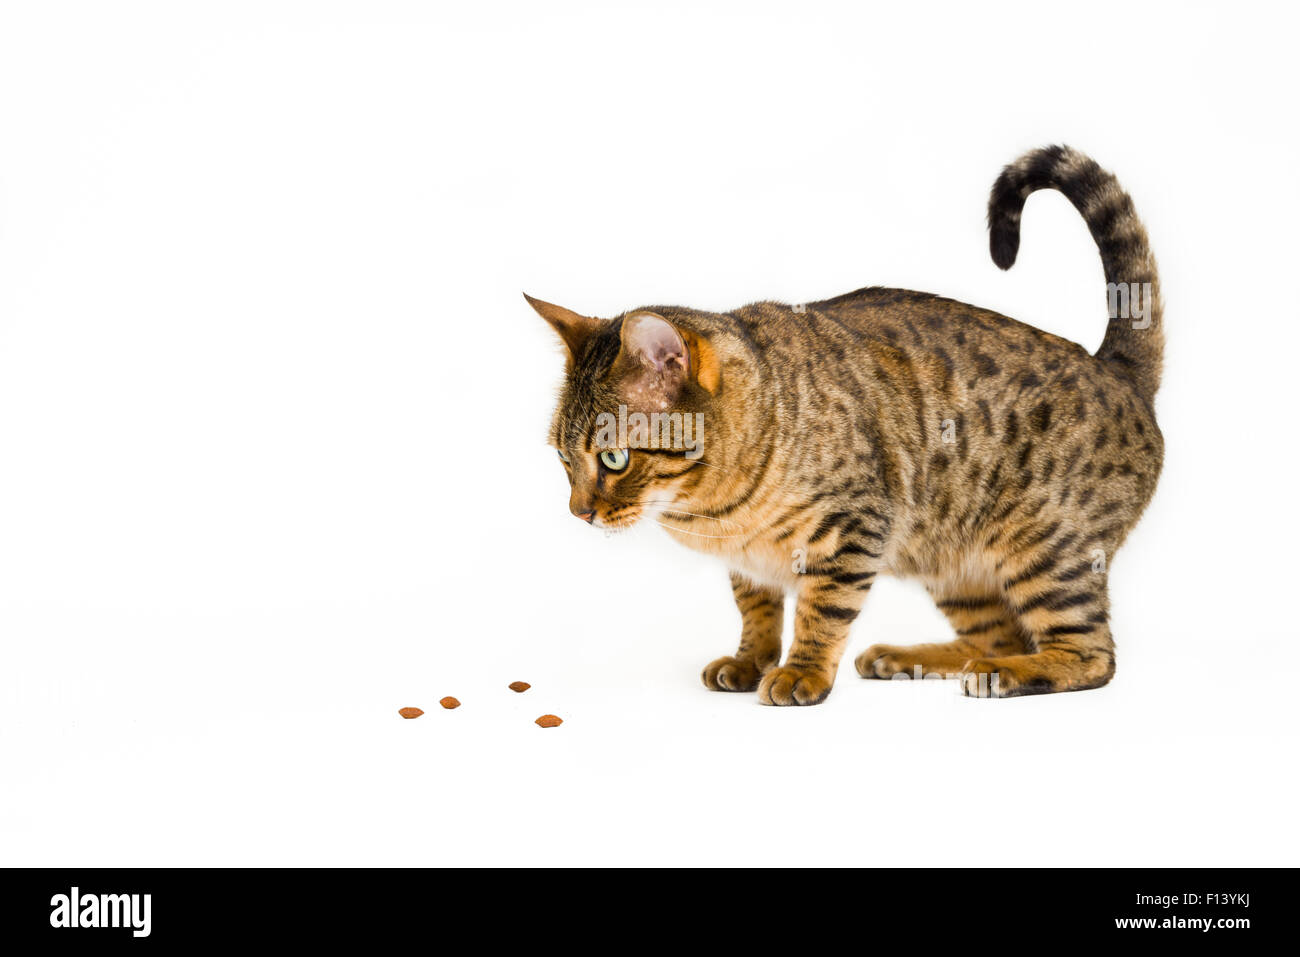 Cat looking at food. Isolated on white background. Stock Photo